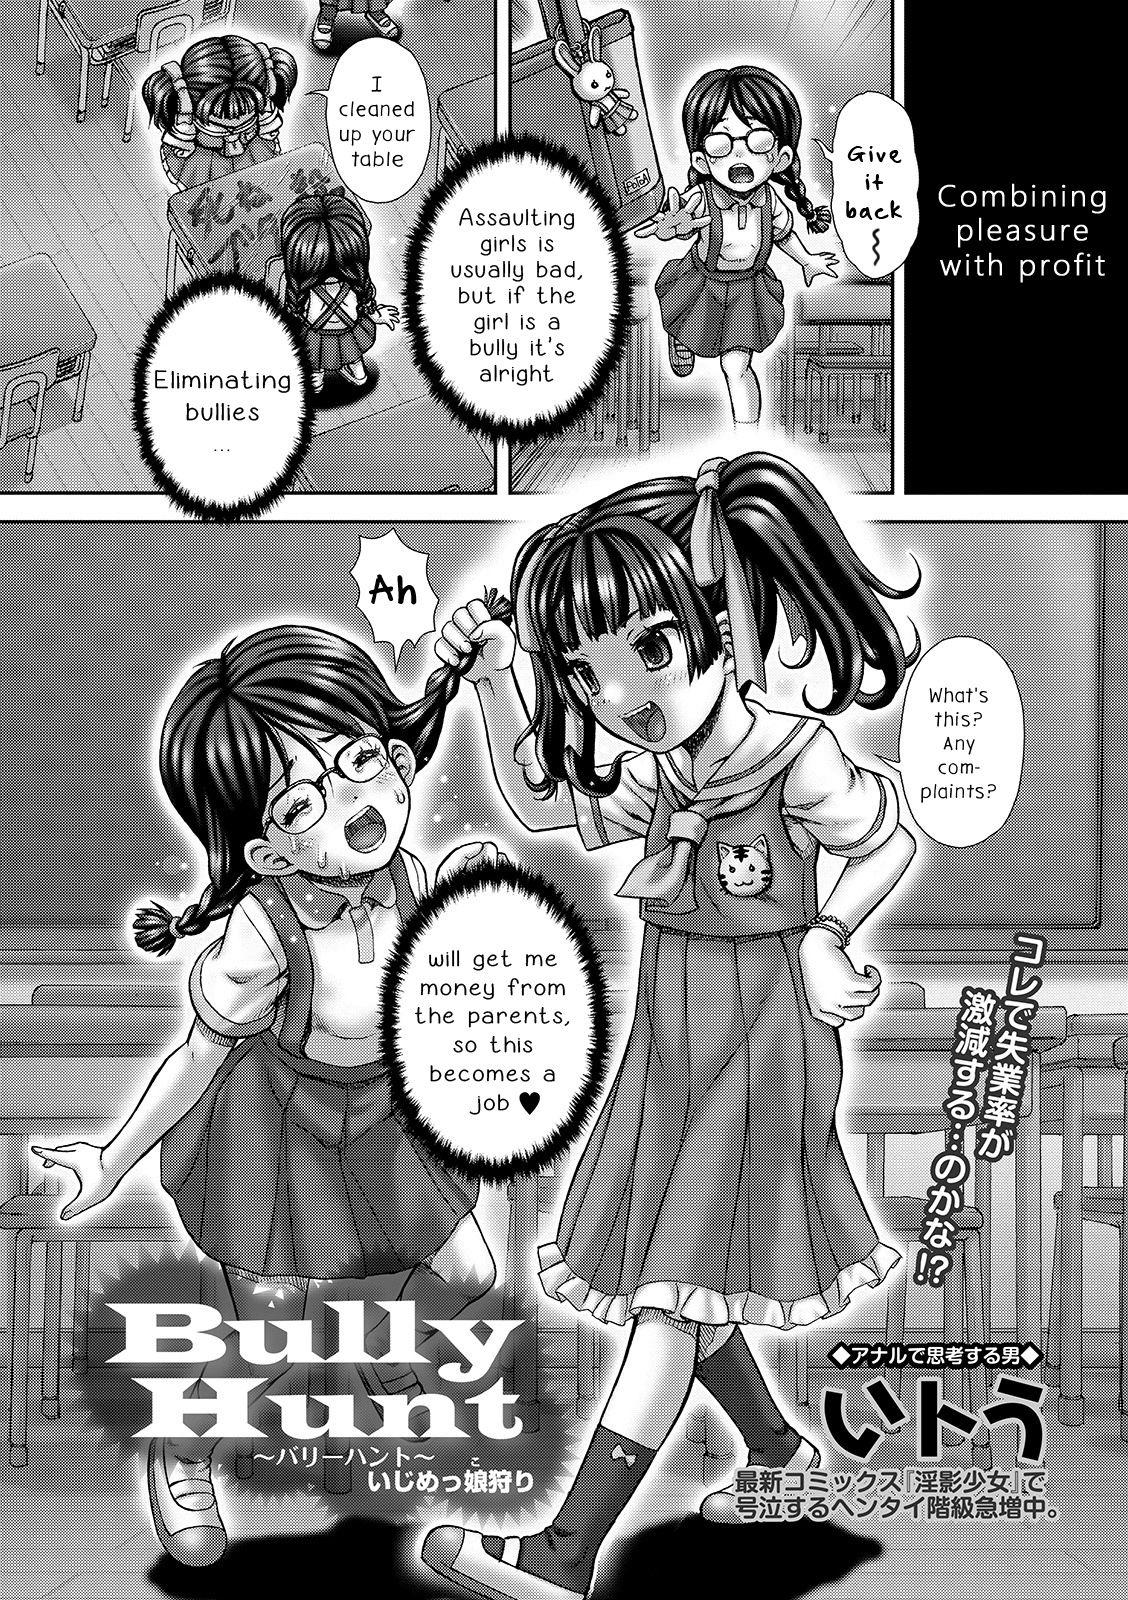 Buttfucking Bully Hunt Vip - Page 2